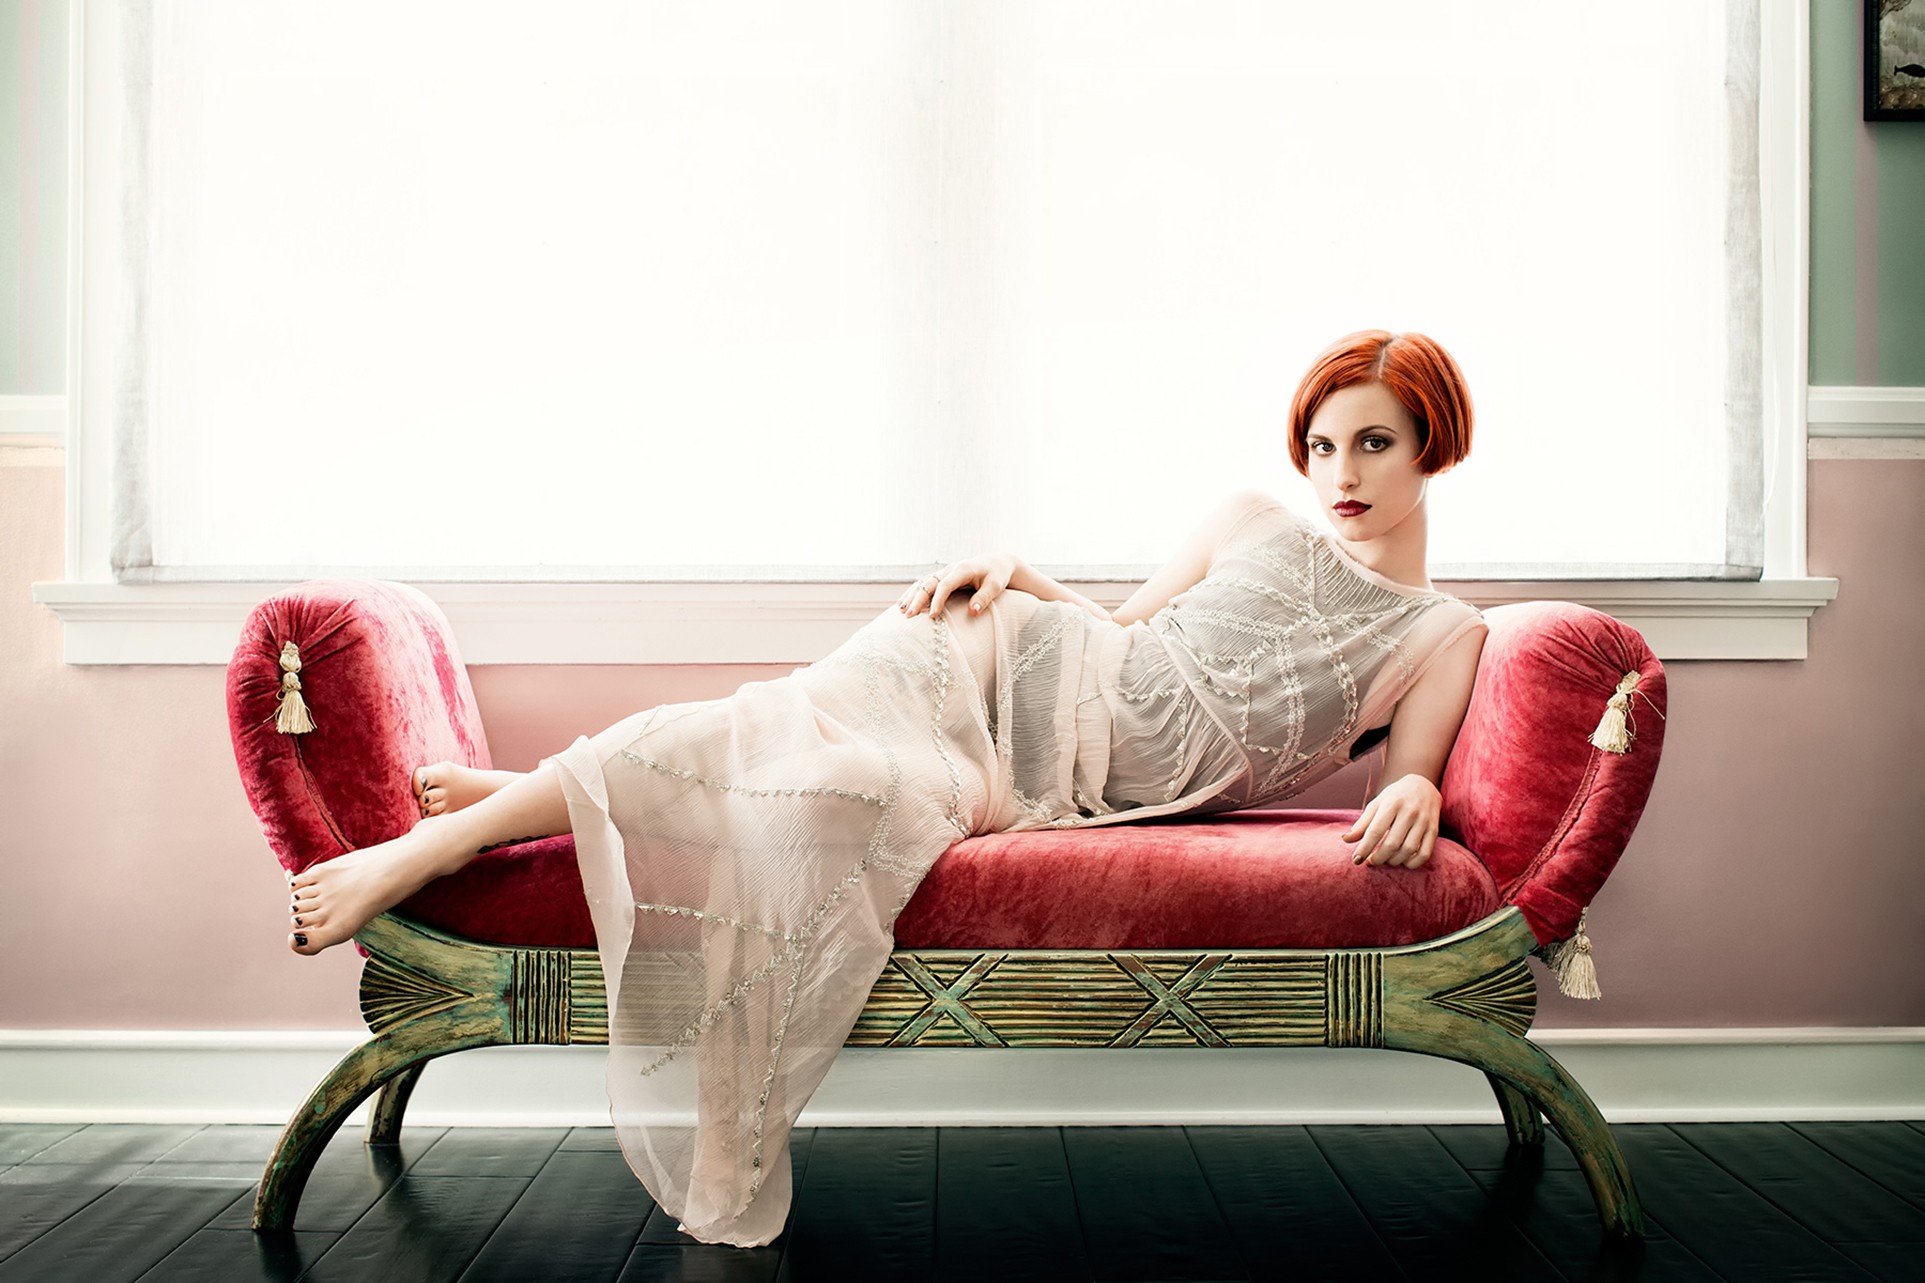 People 1925x1283 Hayley Williams women redhead short hair pale see-through clothing lying on side looking at viewer smoky eyes tiptoe barefoot women indoors legs legs together makeup red lipstick indoors painted toenails